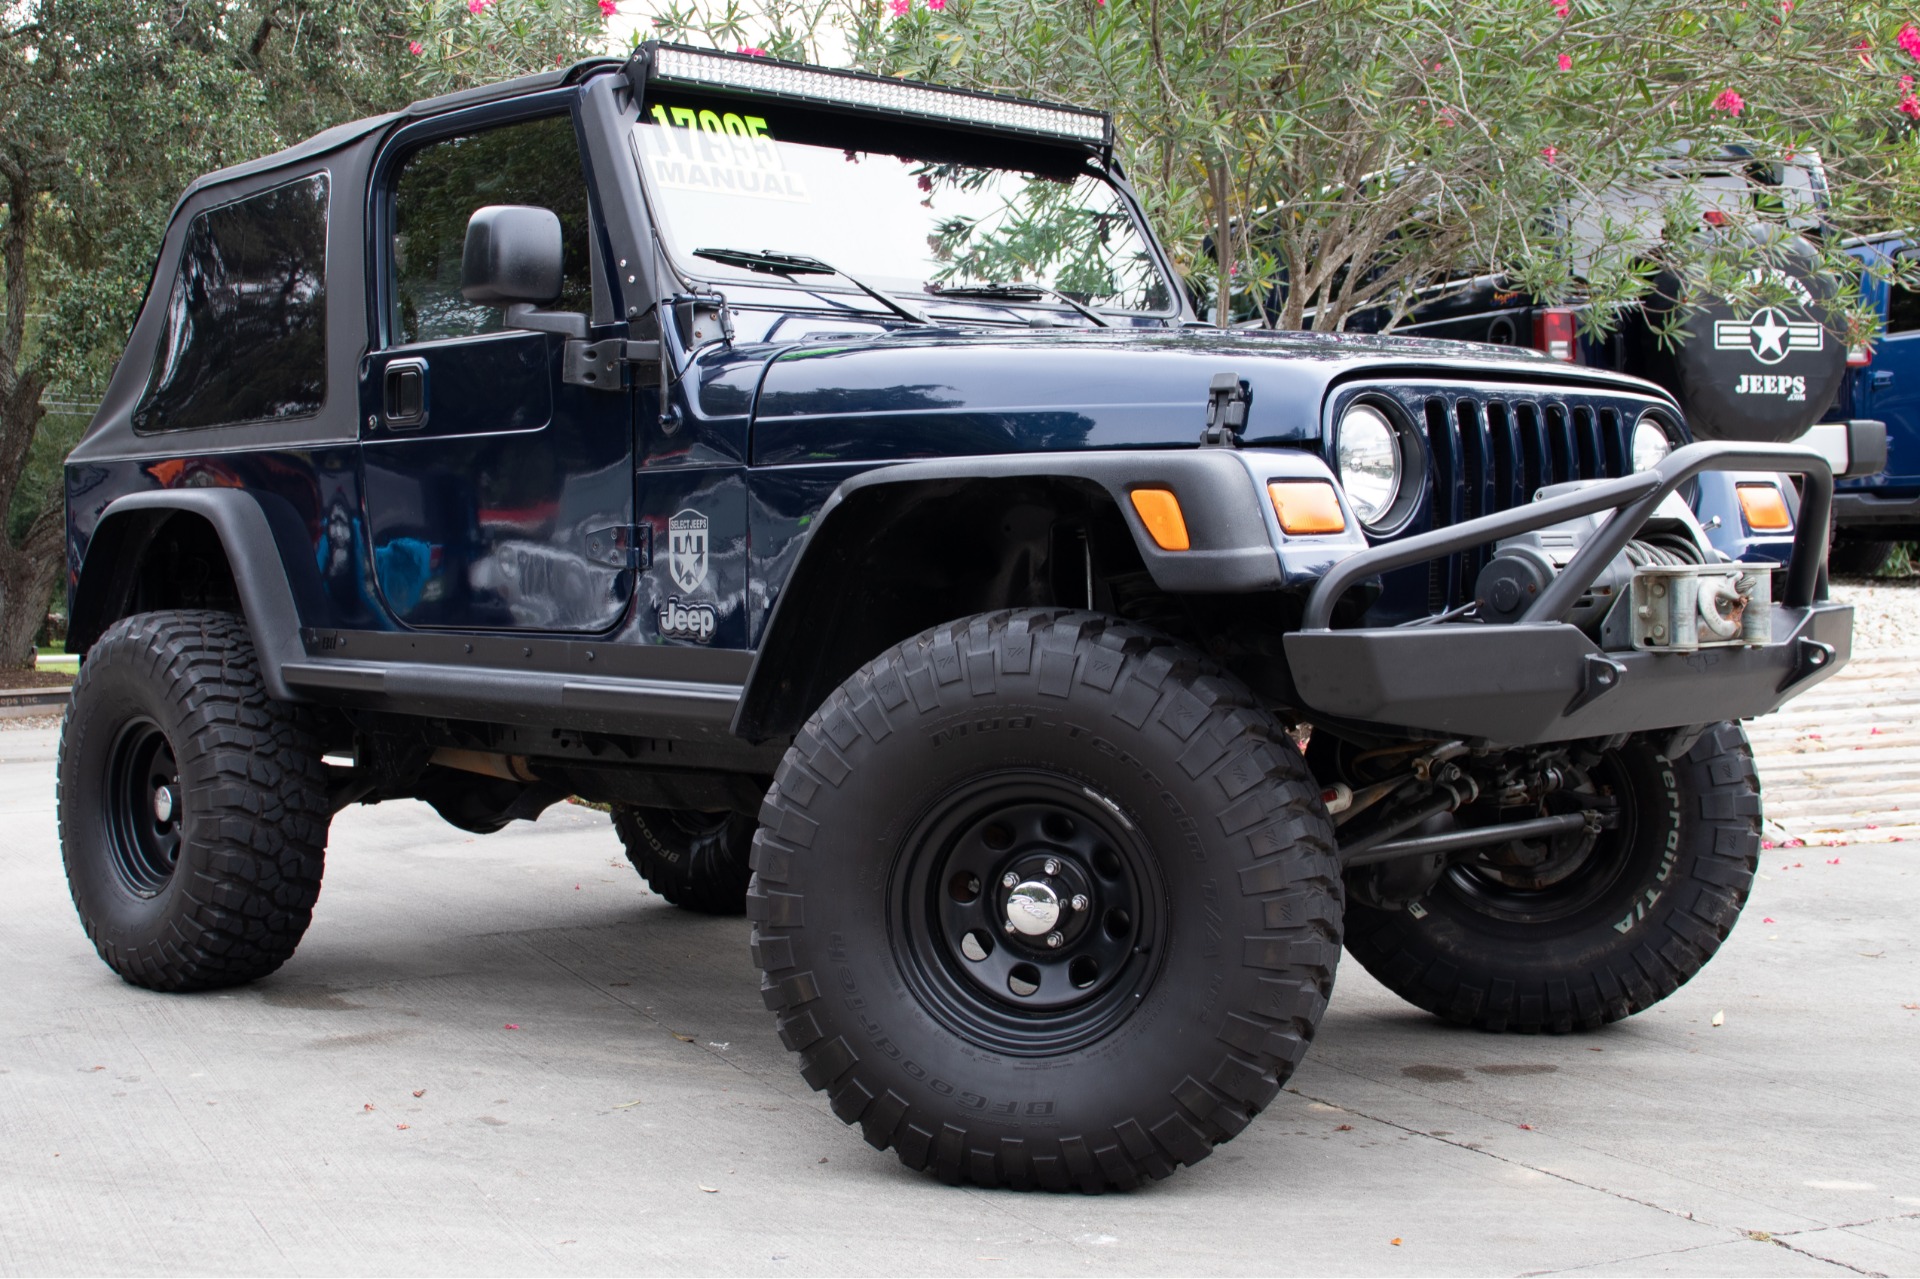 Used 2005 Jeep Wrangler Unlimited 2dr Unlimited For Sale ($18,995) | Select  Jeeps Inc. Stock #375180